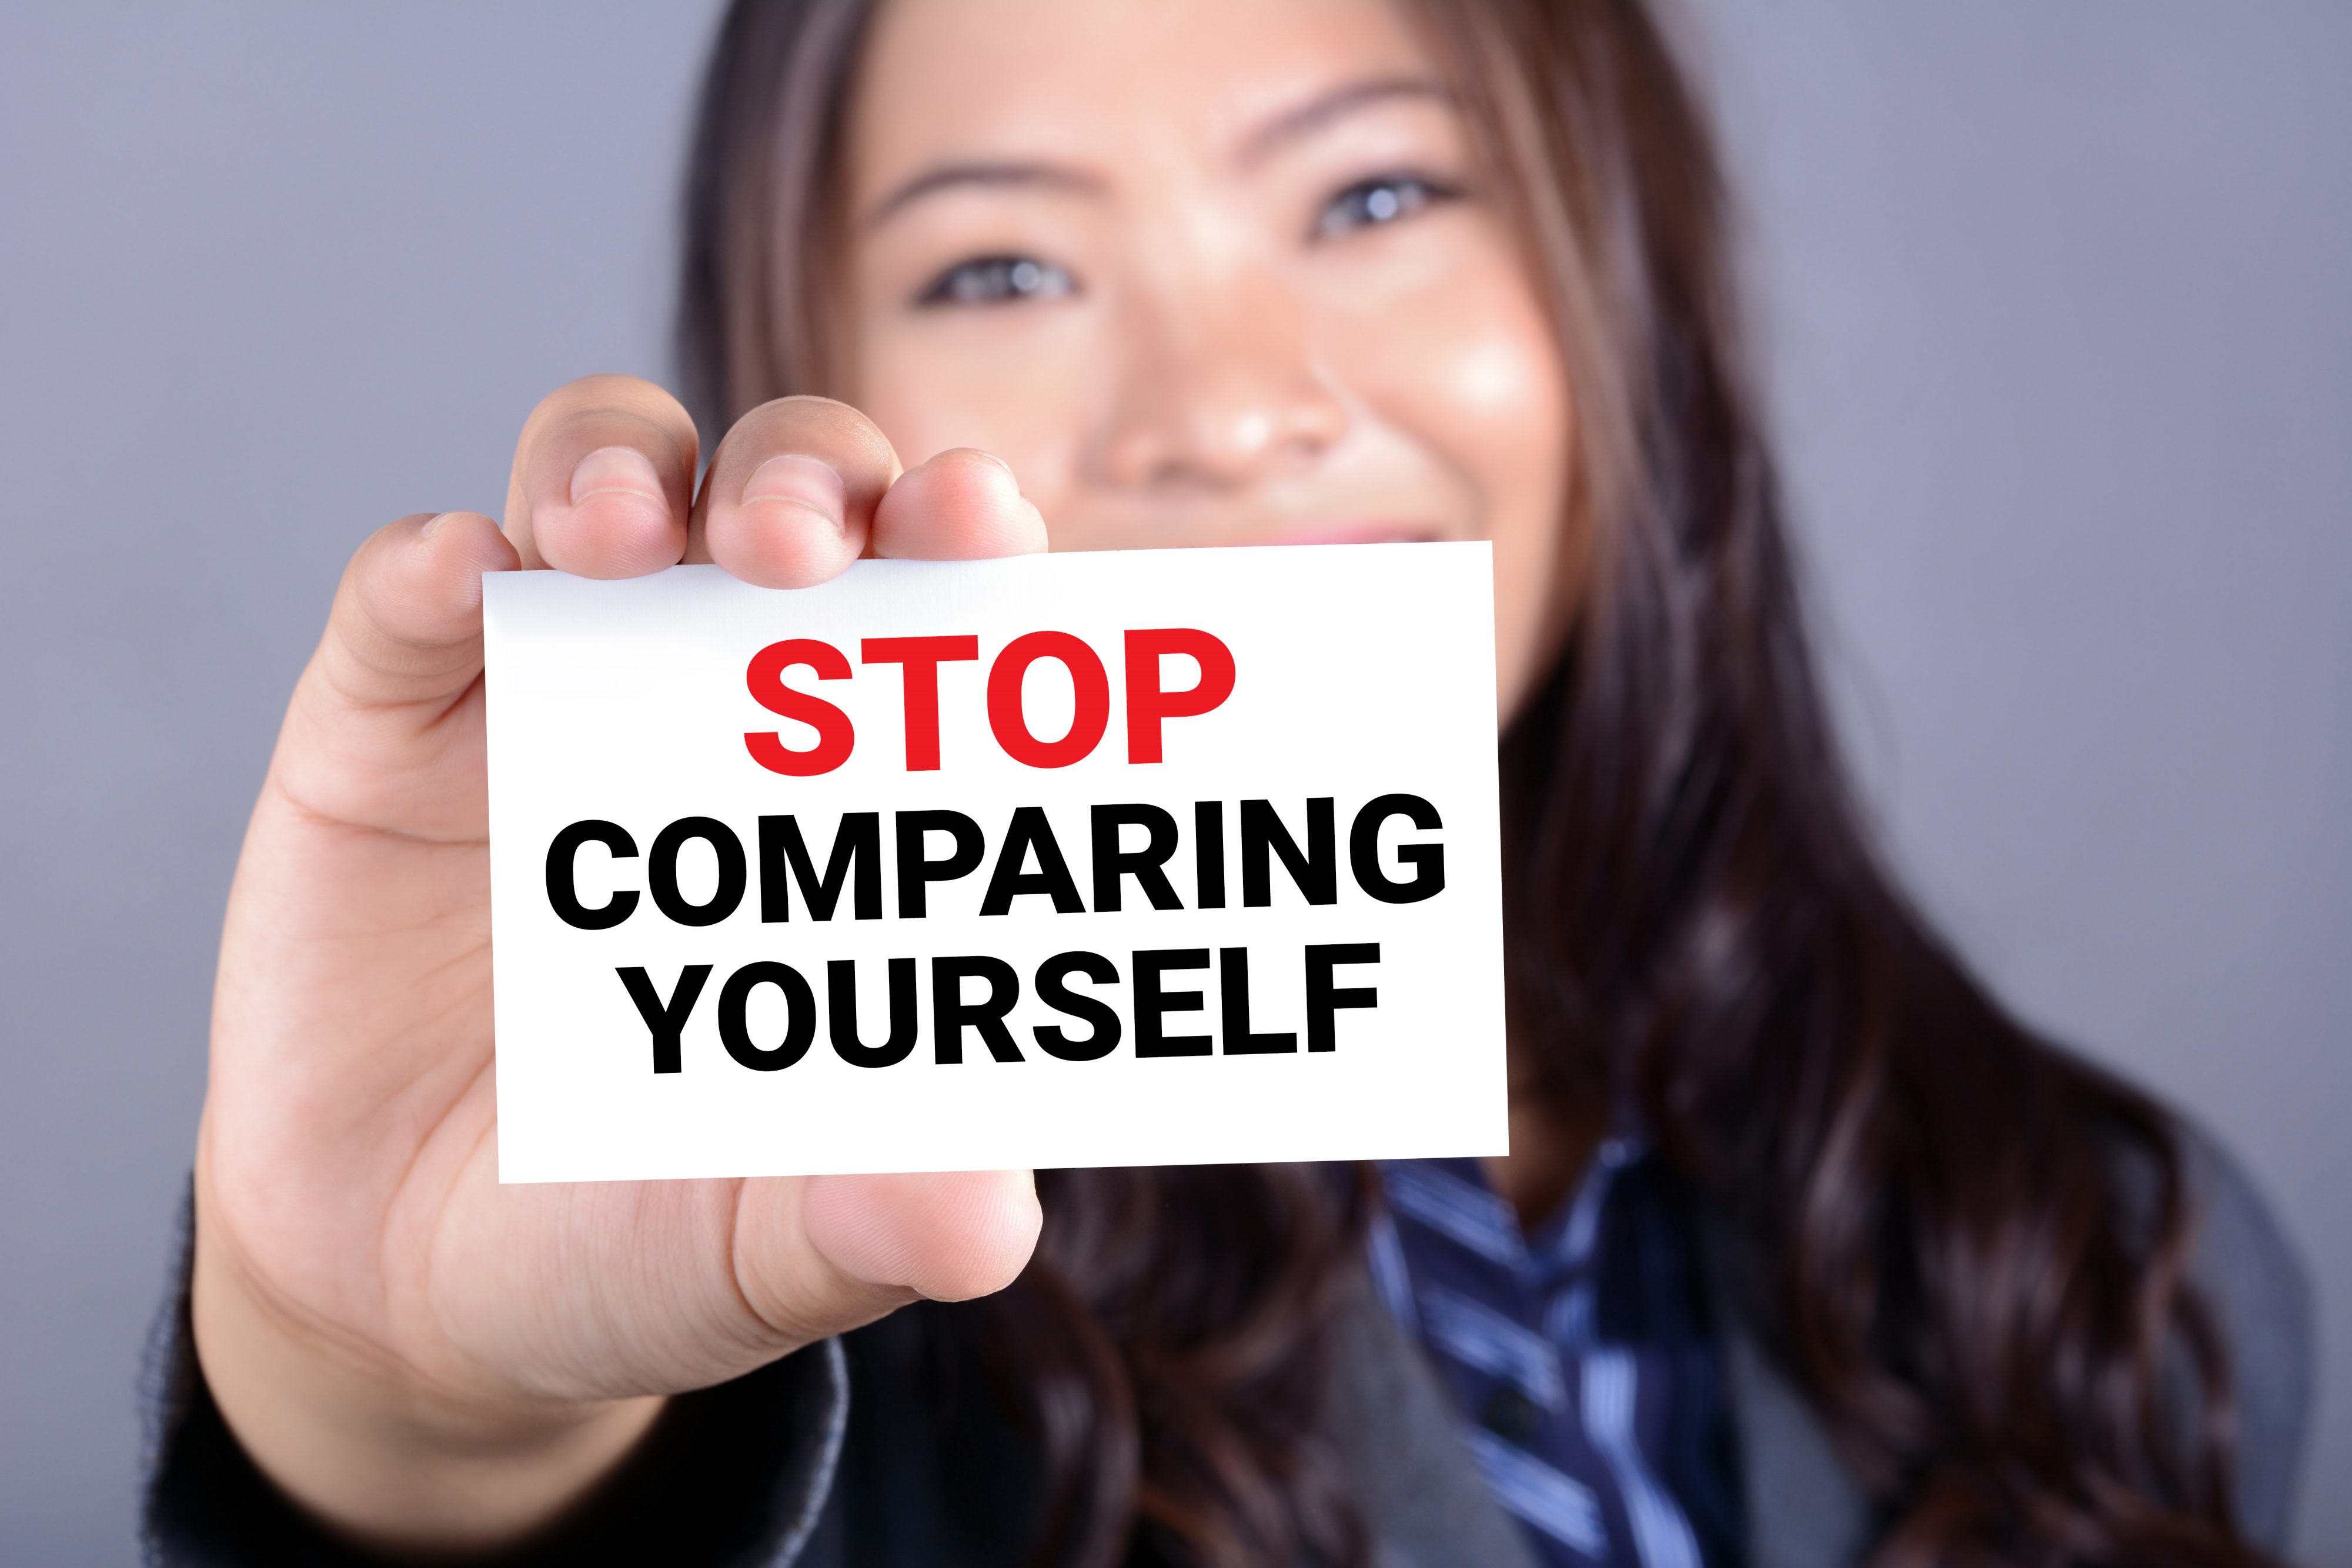 Stop comparing yourself to others.